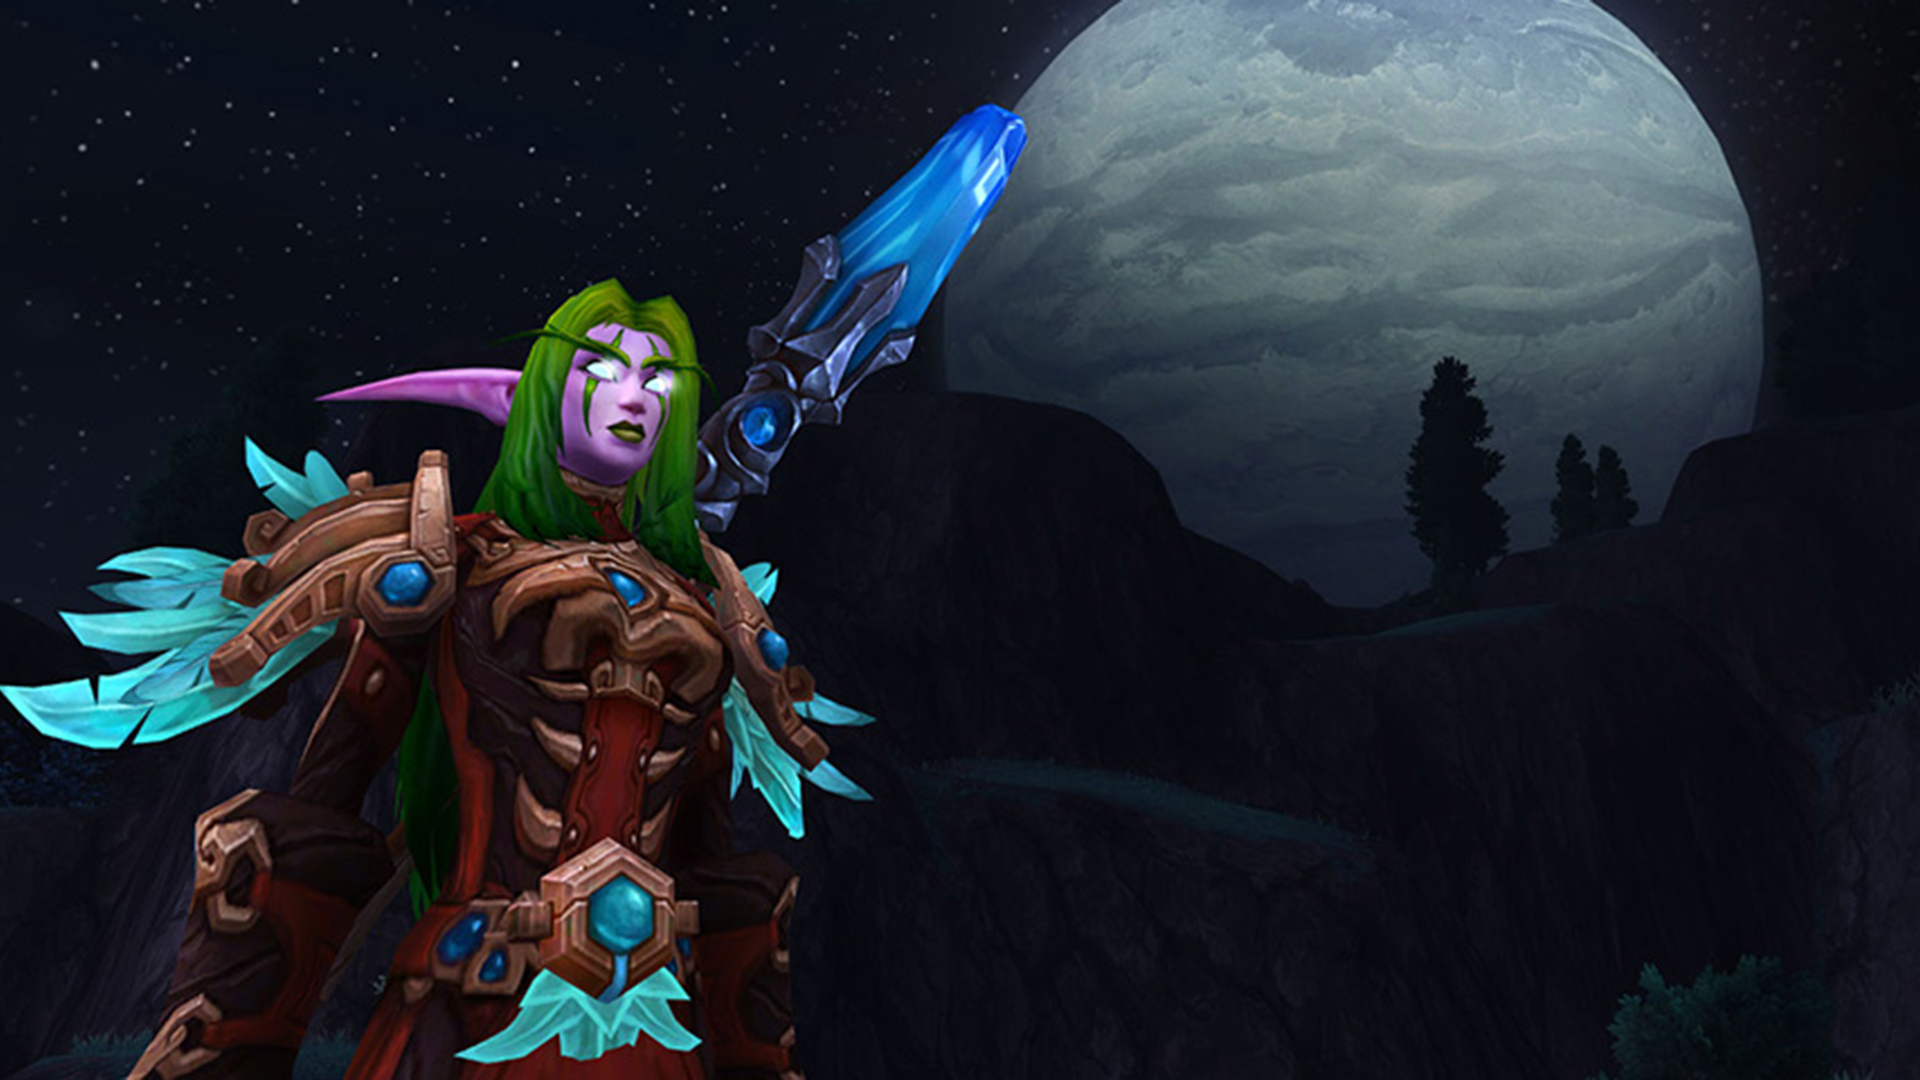 World of Warcraft Beginner's guide: How to get into WoW and WoW Classic